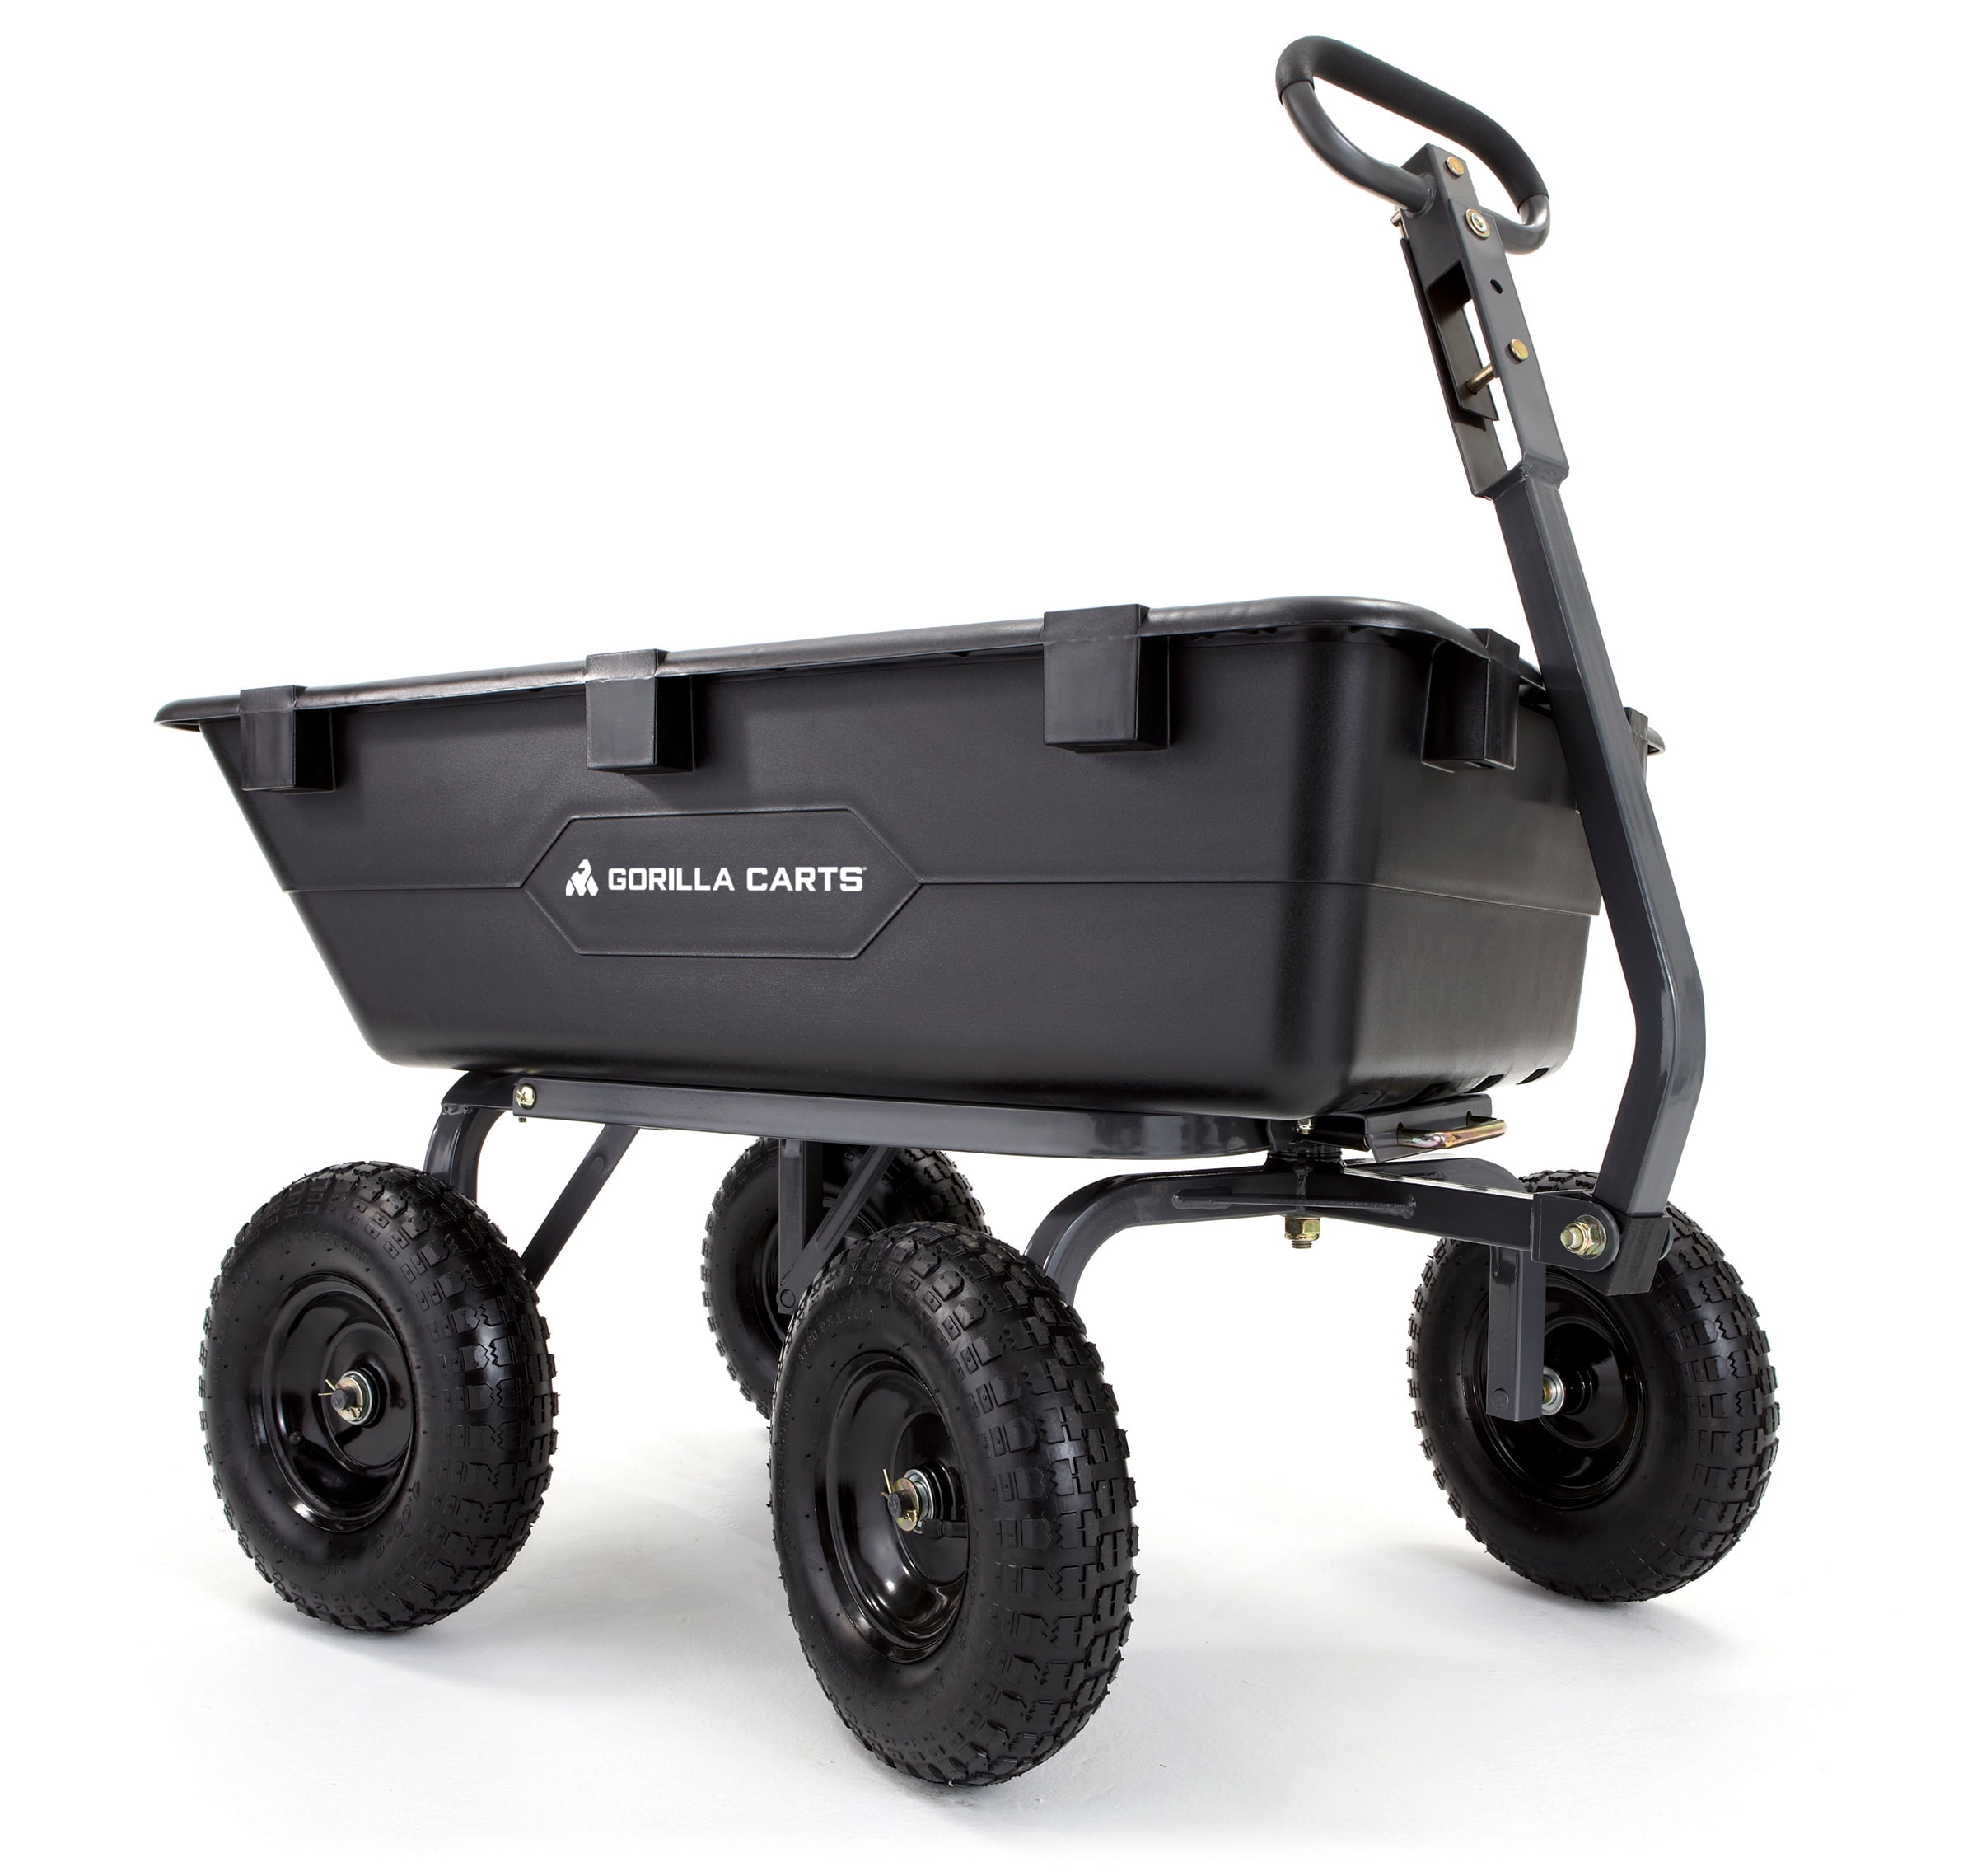 Details about   Gorilla Carts Heavy-Duty Poly Yard Dump Cart 2-In-1 Convertible Handle 1200 lbs 